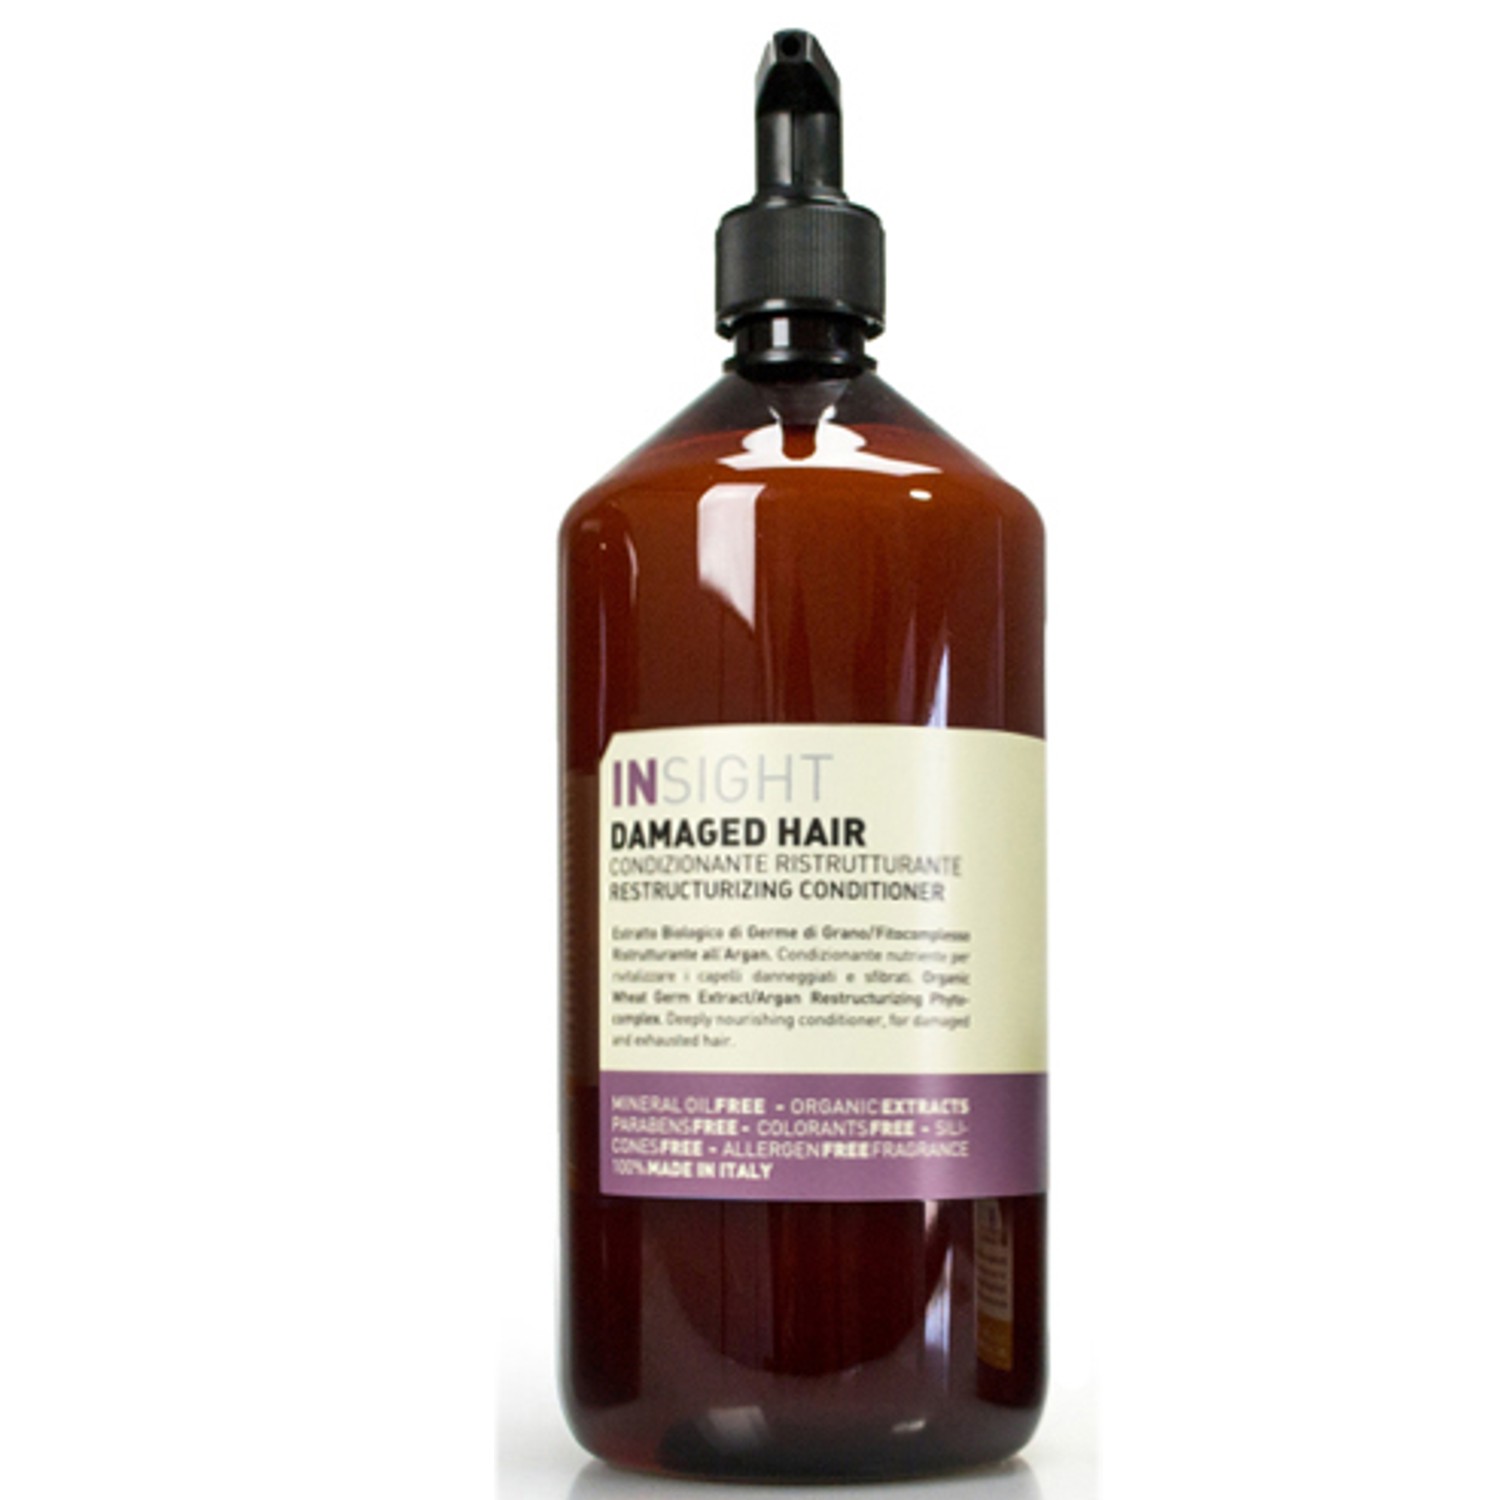 INSIGHT Damaged Hair Restructurizing Conditioner 900 ml